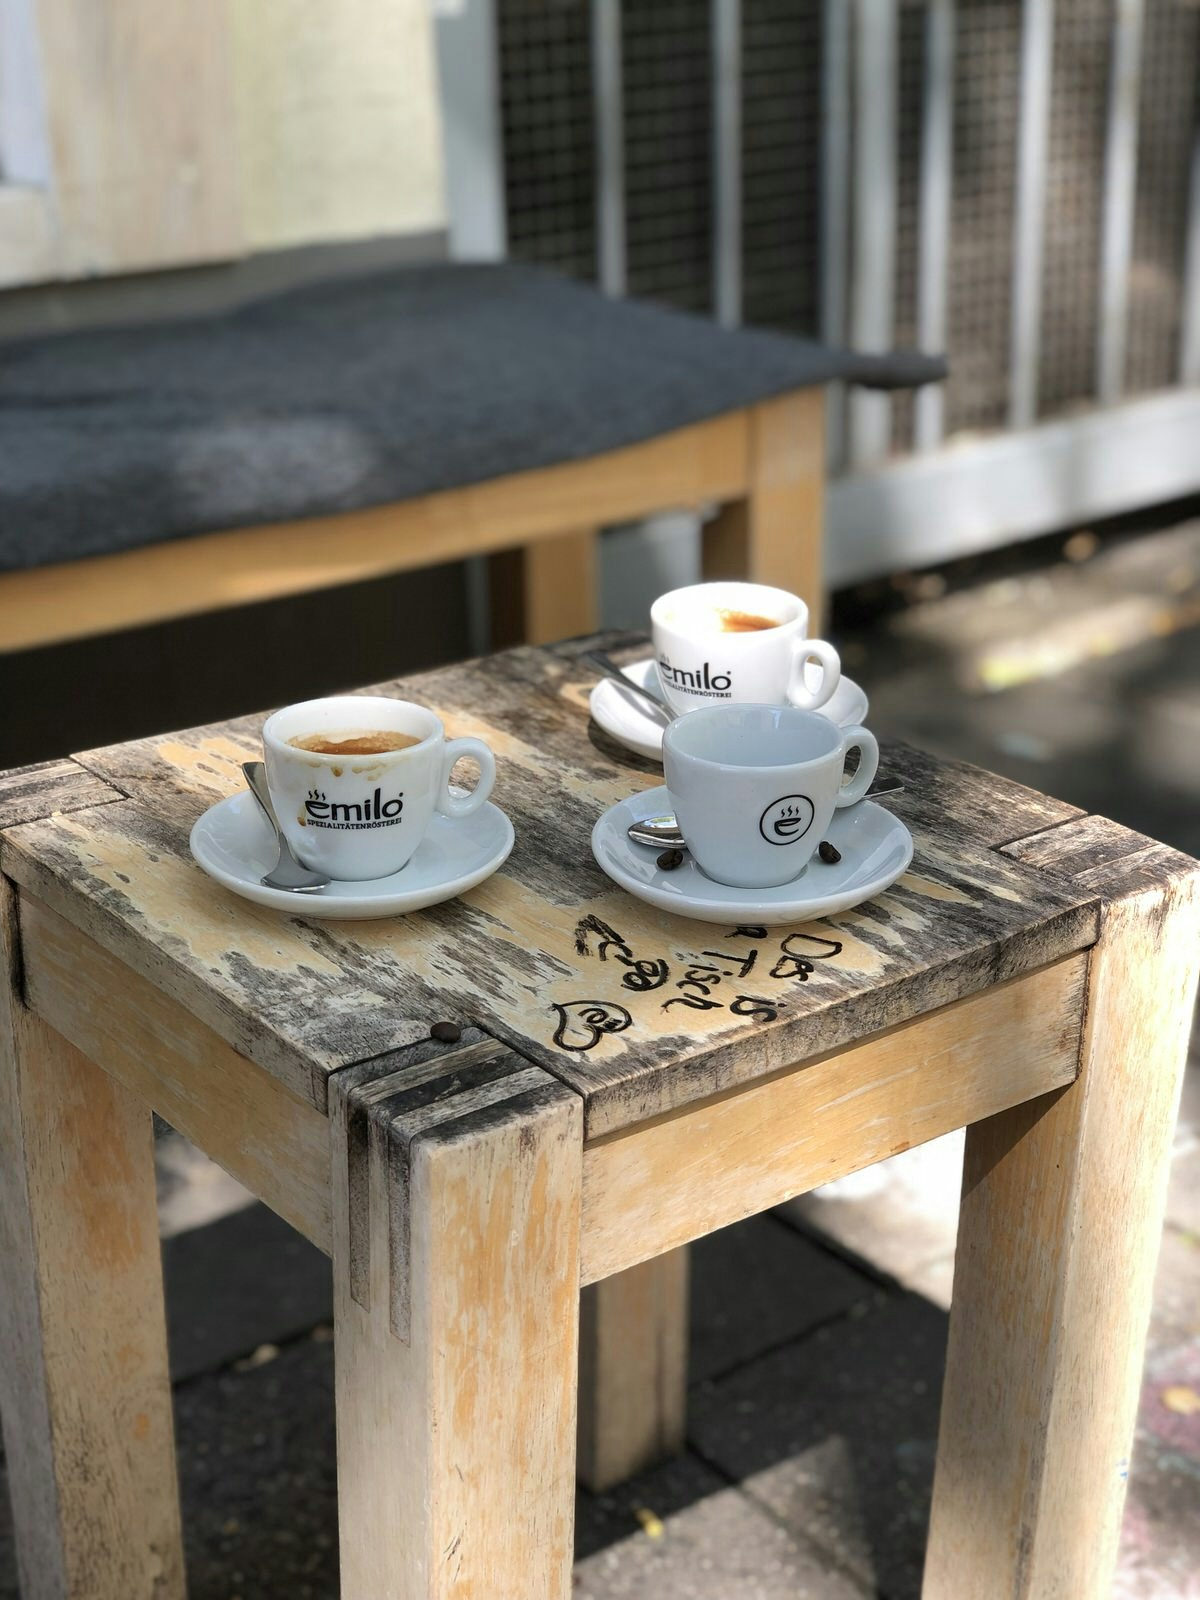 A close up of three white coffee cups and saucers on a small, worn wooden table with some graffiti on it. 